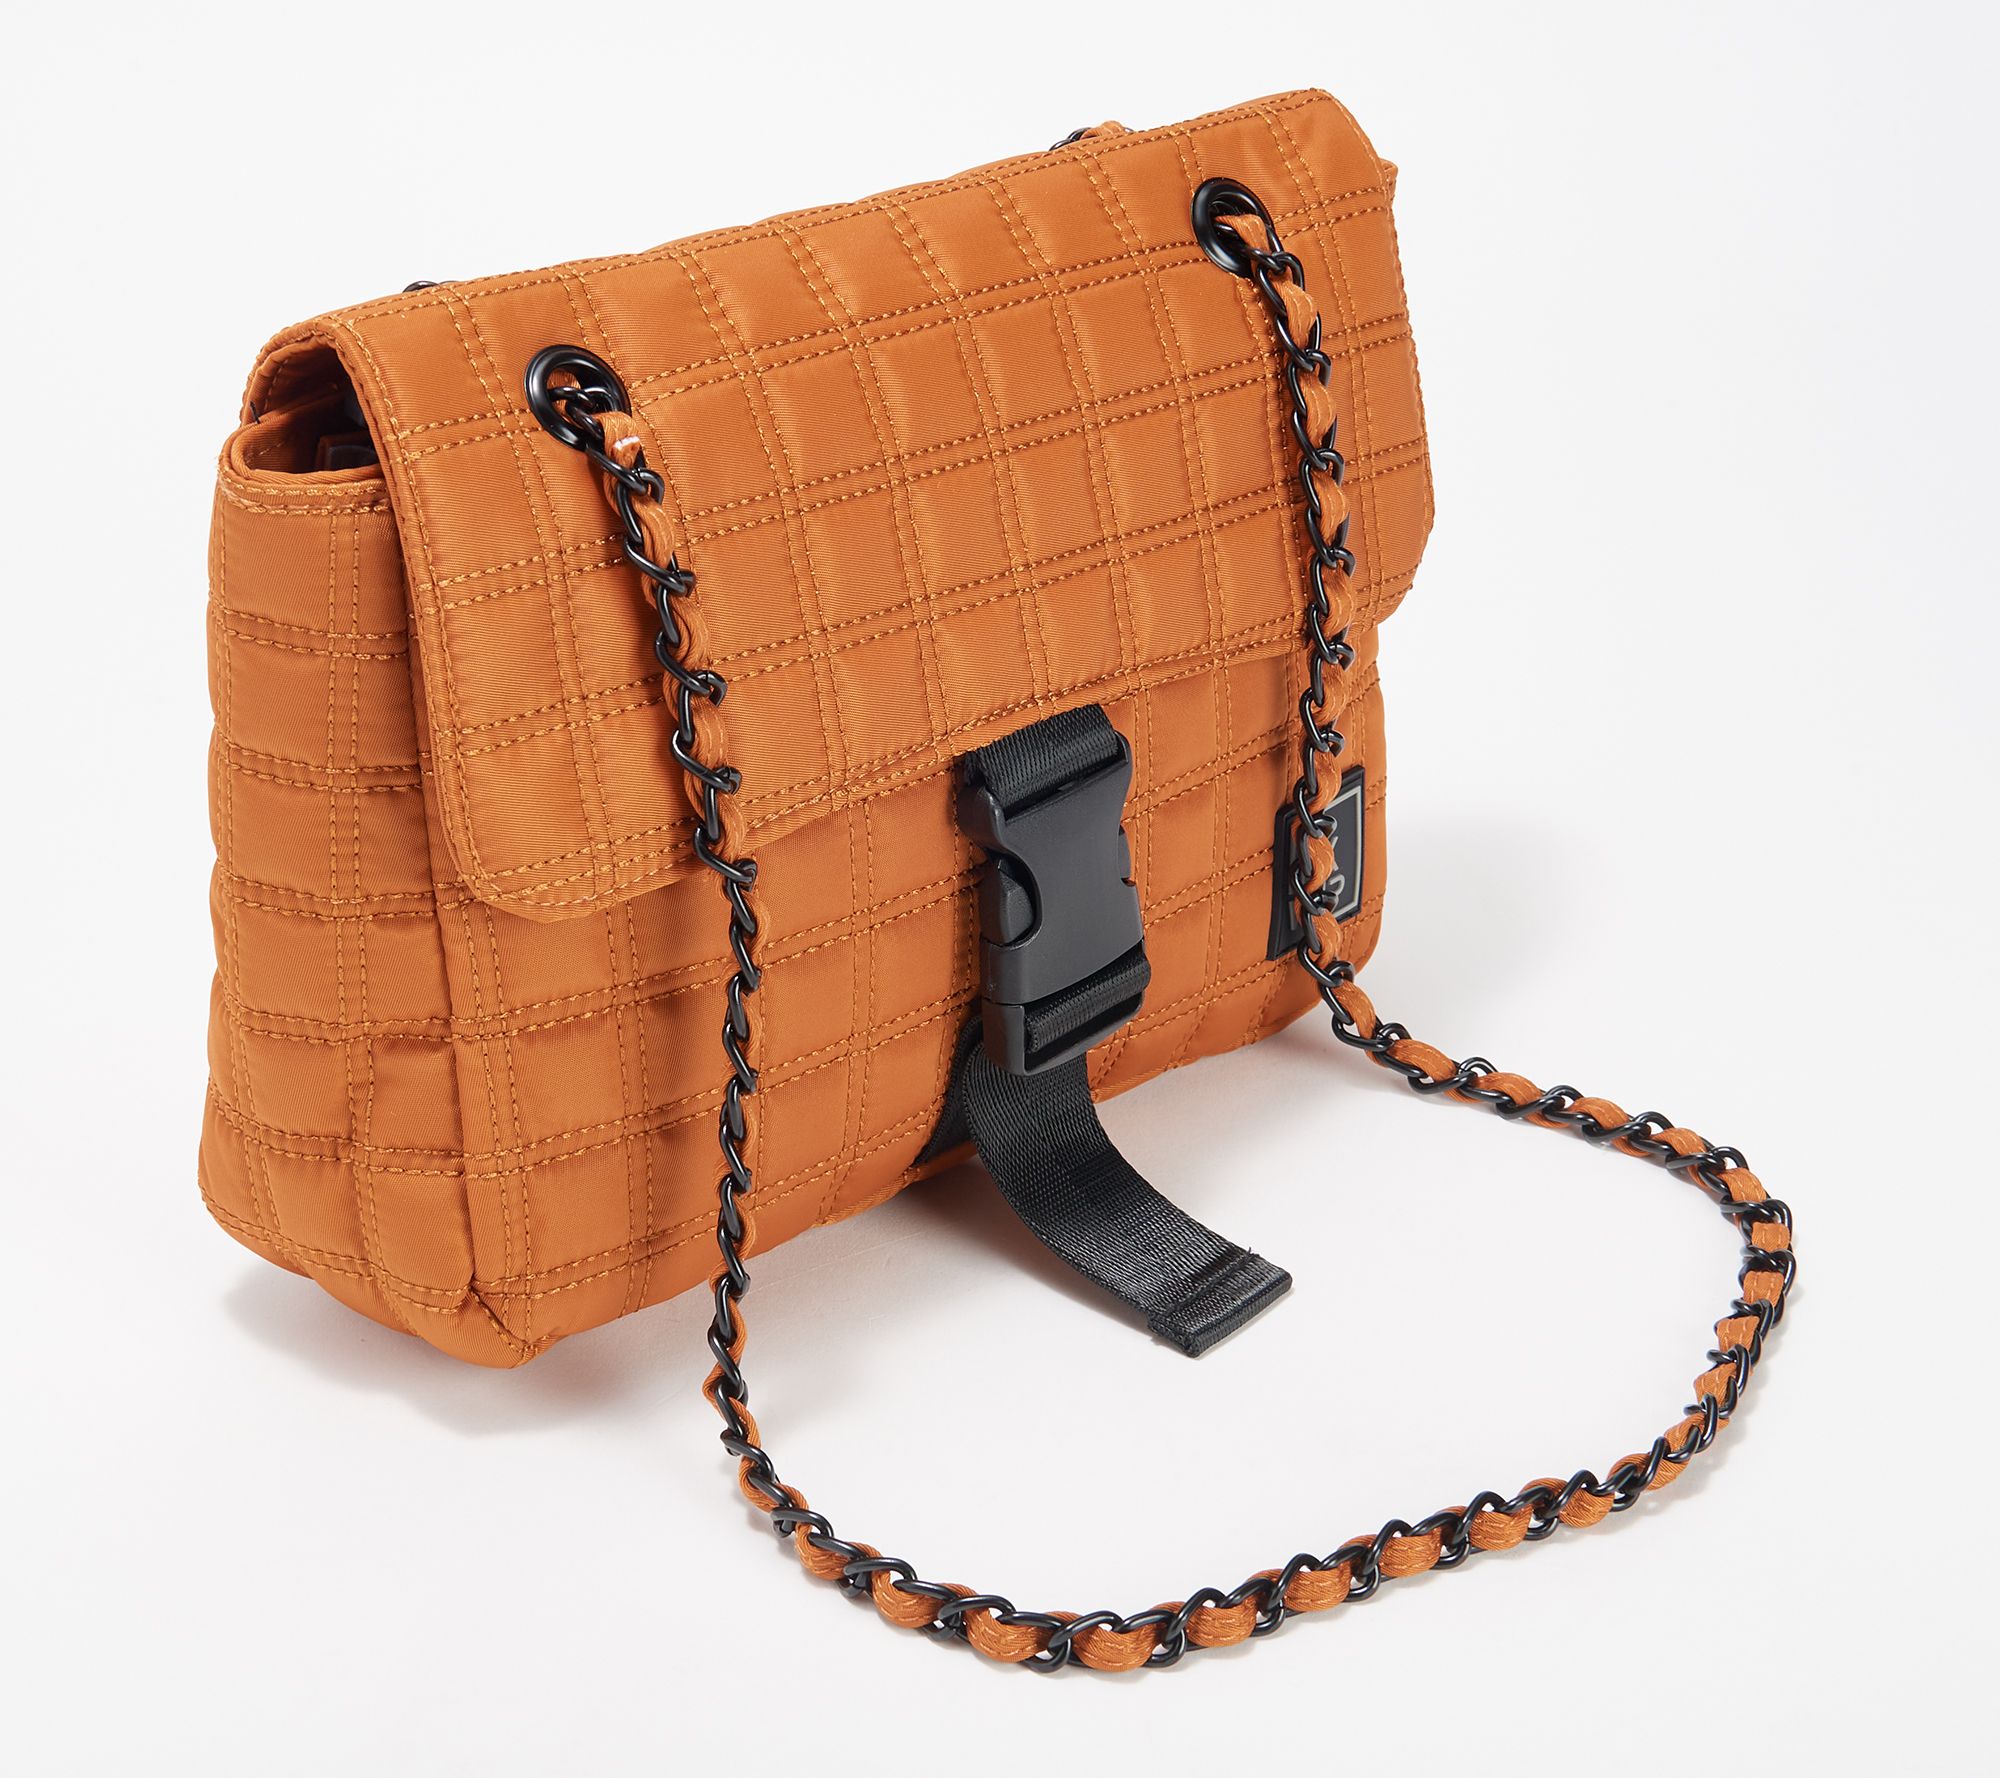 IHKWIP Quilted Flap Convertible Shoulder Bag w/ Chain Strap 